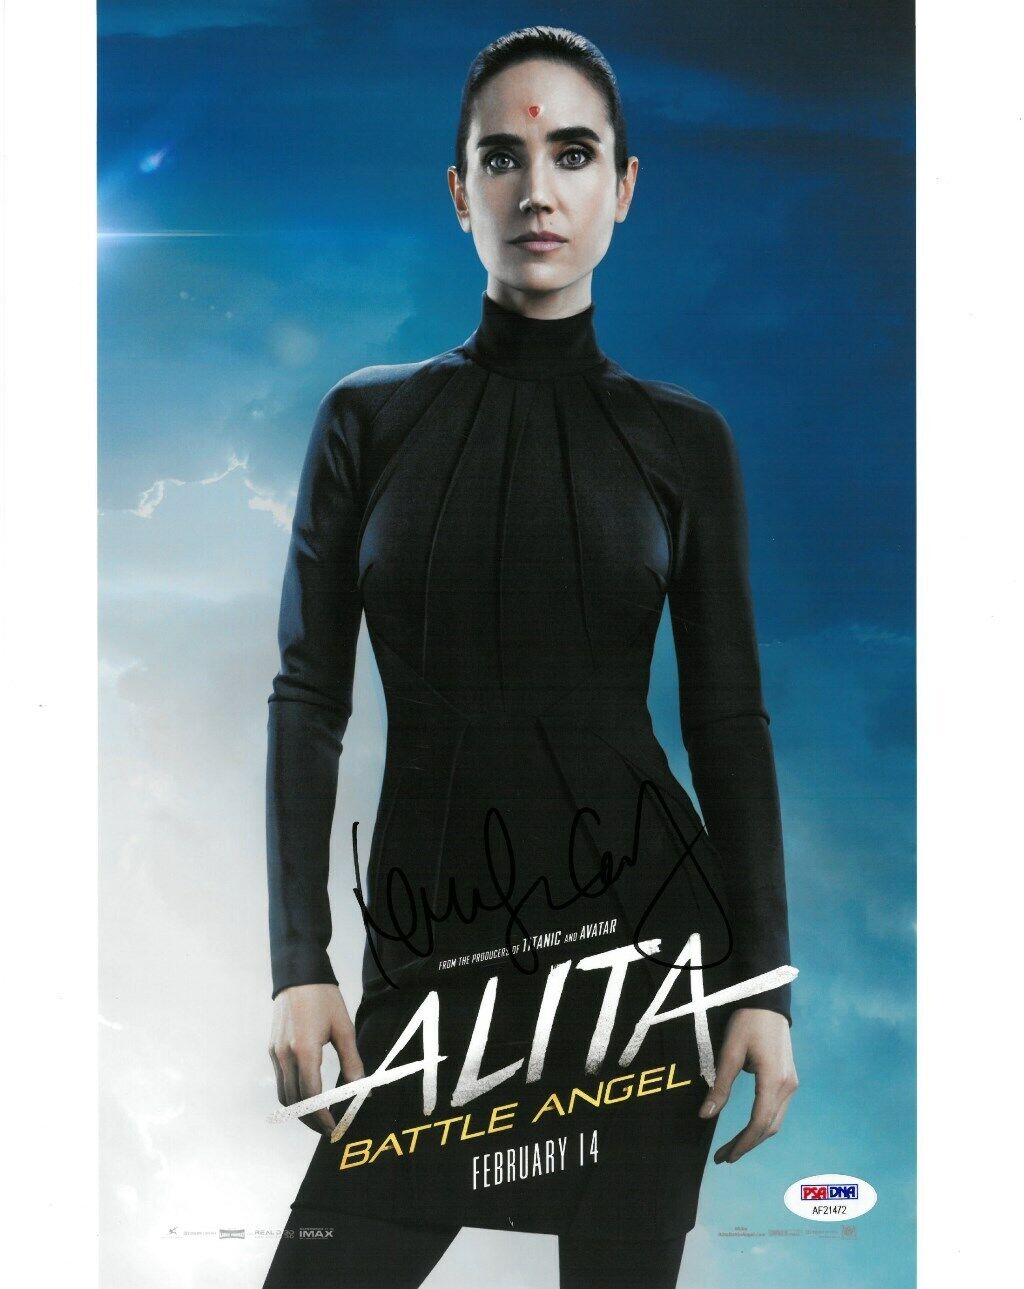 Jennifer Connelly Signed Alita Authentic Autographed 11x14 Photo Poster painting PSA/DNA#AF21472